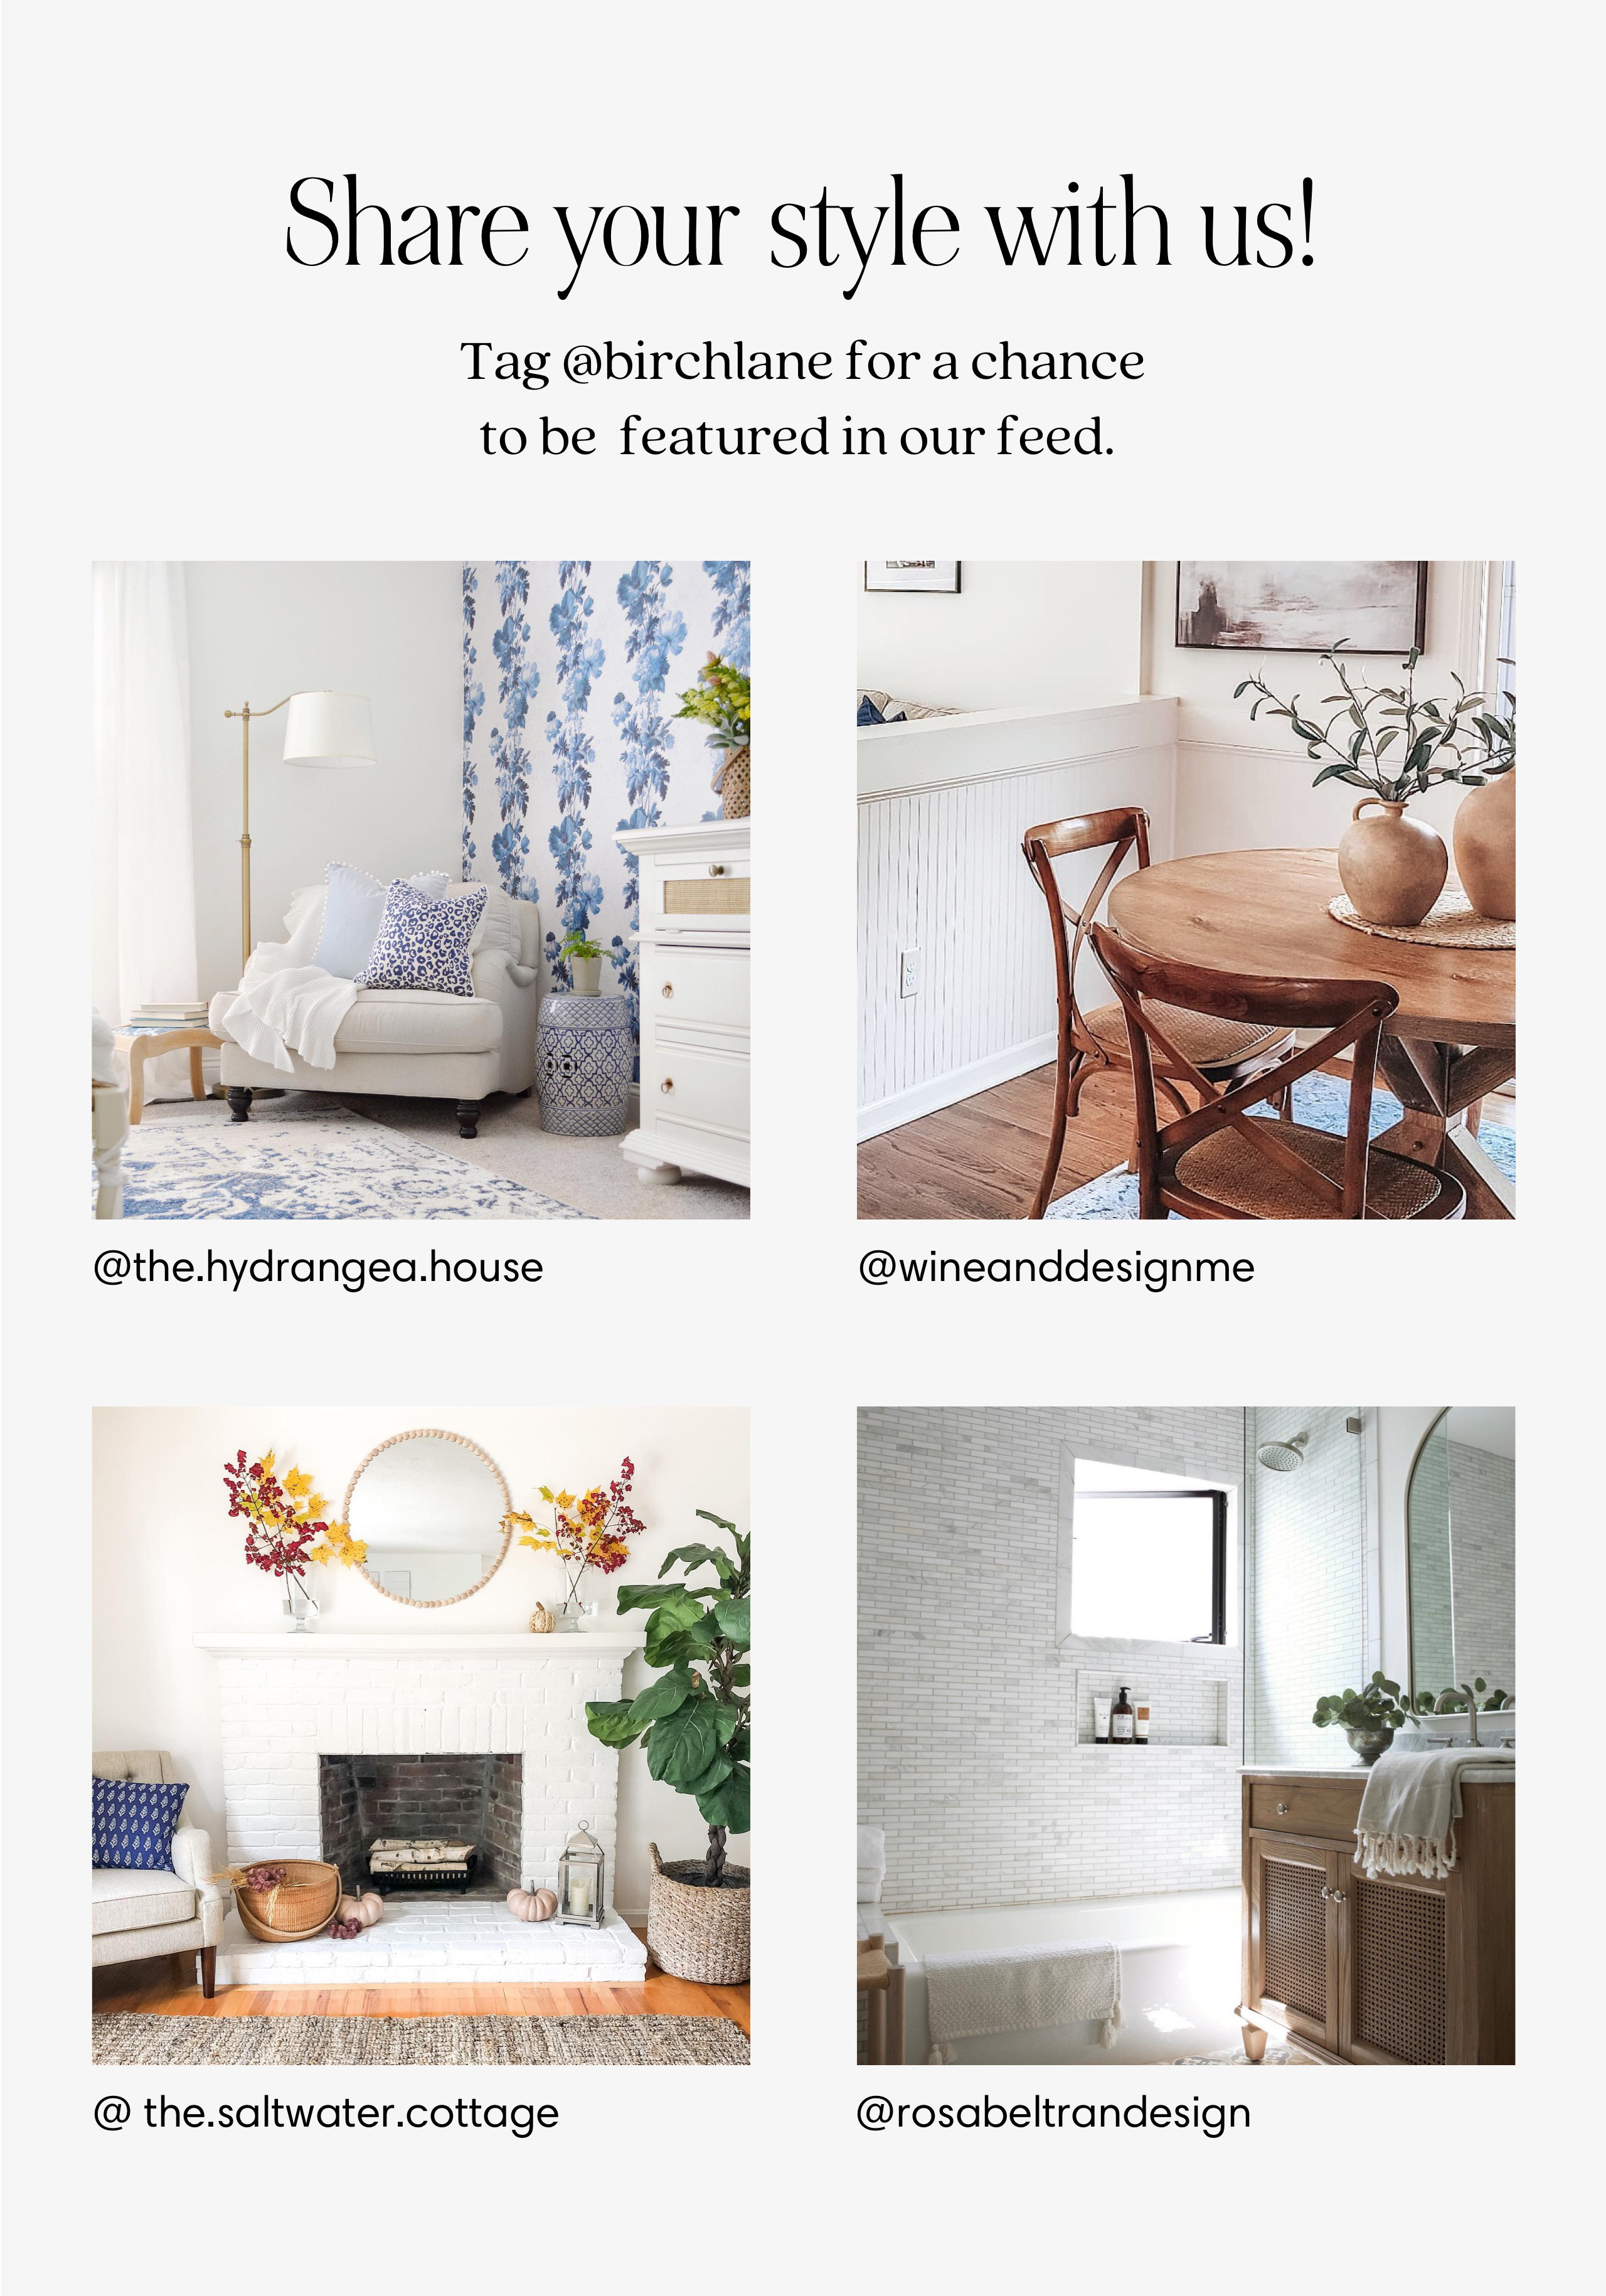 Share your style with us! Tag @birchlane for a chance to be featured in our feed. 3 . bk R Lo i: S T A o f: - ok Z ST e @the.hydrangea.house @ the.saltwater.cottage @rosabeltrandesign 